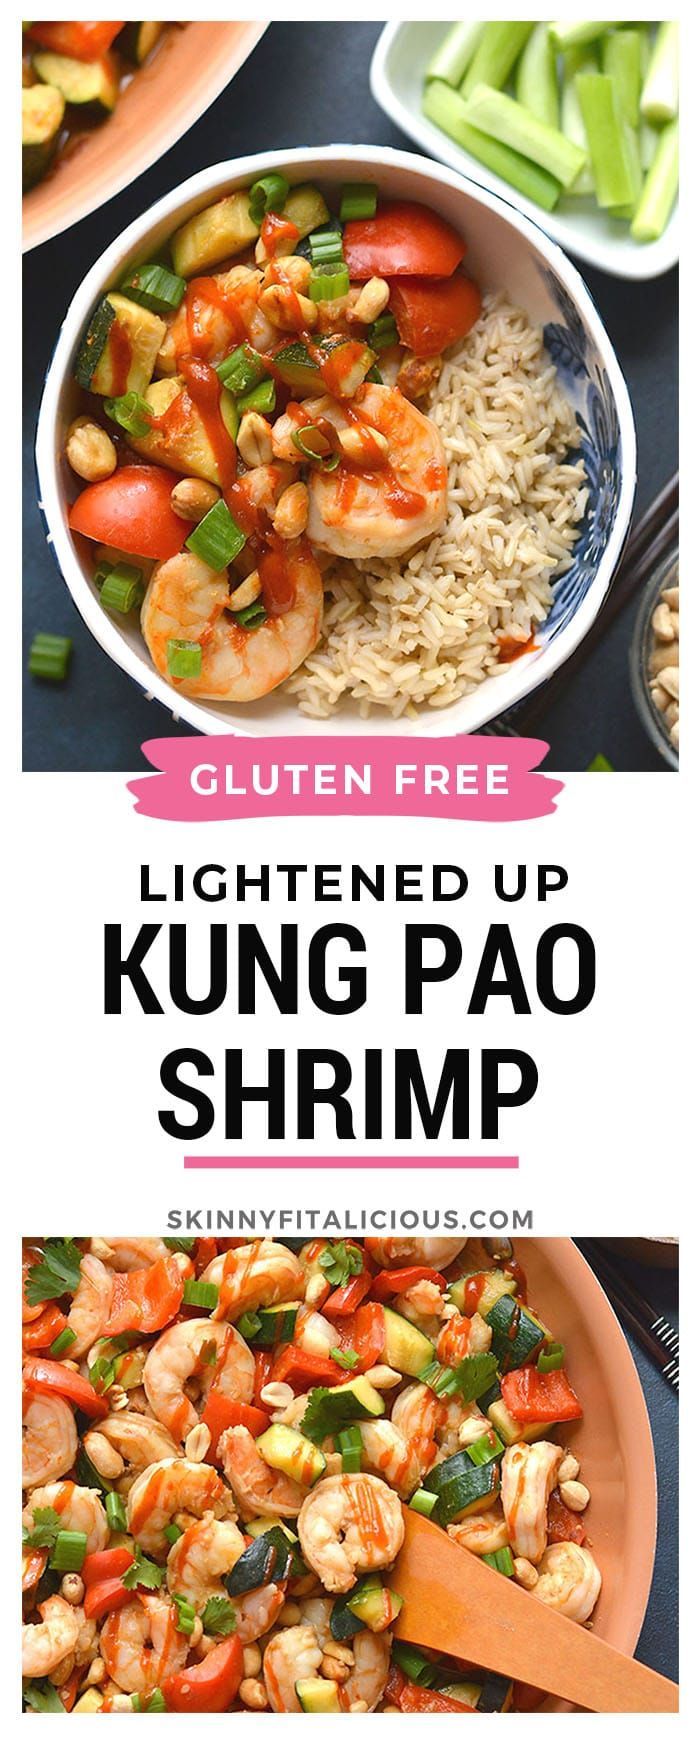 Gluten Free Kung Pao Shrimp -   15 healthy recipes With Calories gluten free ideas